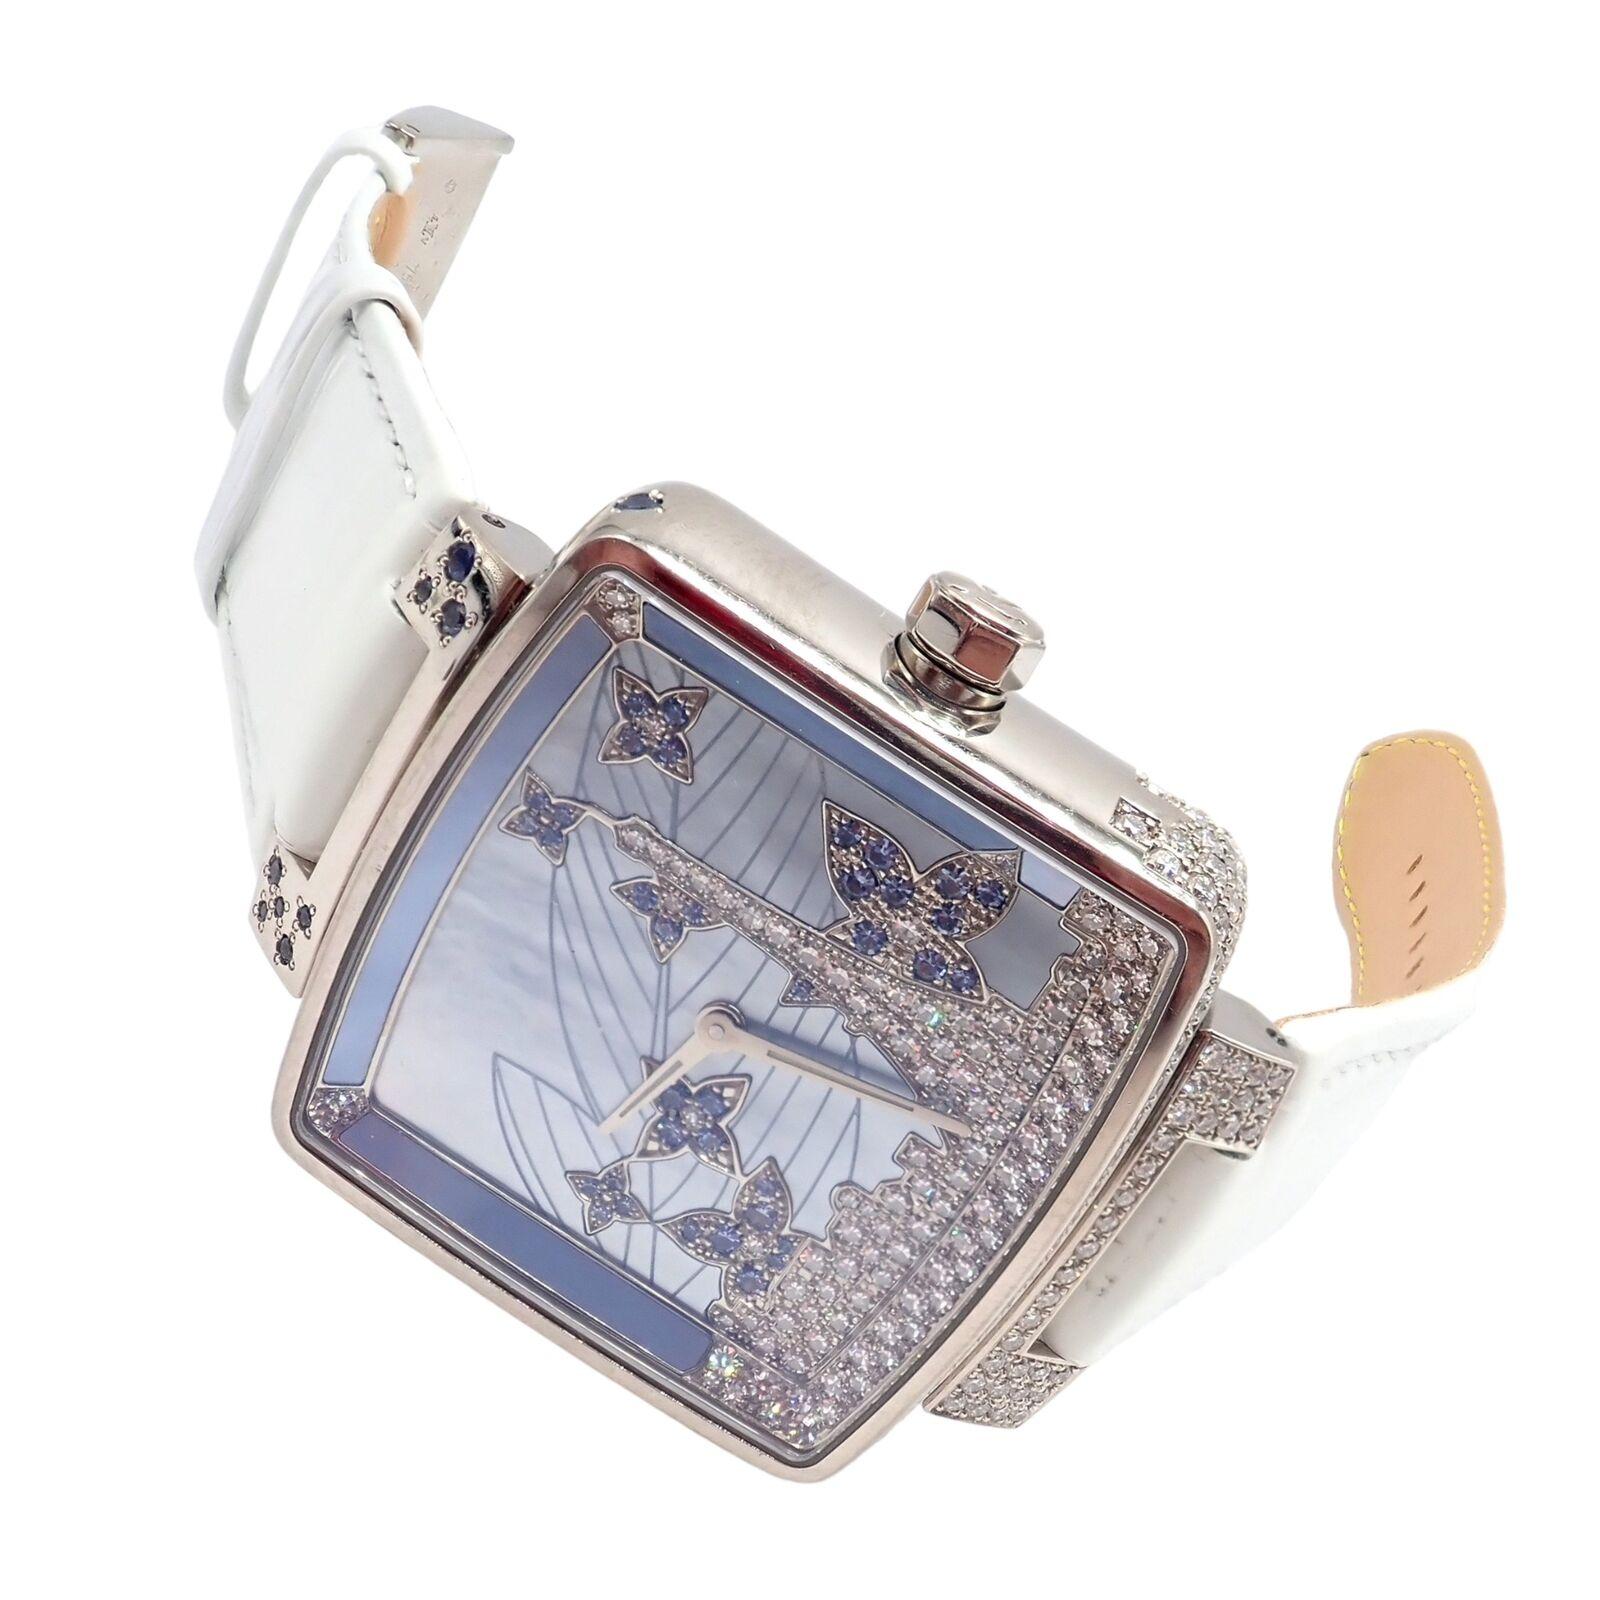 18k White Gold Diamond Sapphire Paris 34mm Ladies Watch Q233E Wristwatch by Louis Vuitton.
This is a luxurious limited edition Louis Vuitton ladies' watch crafted in 18K white gold. It boasts a unique Paris-themed design on its dial, adorned with